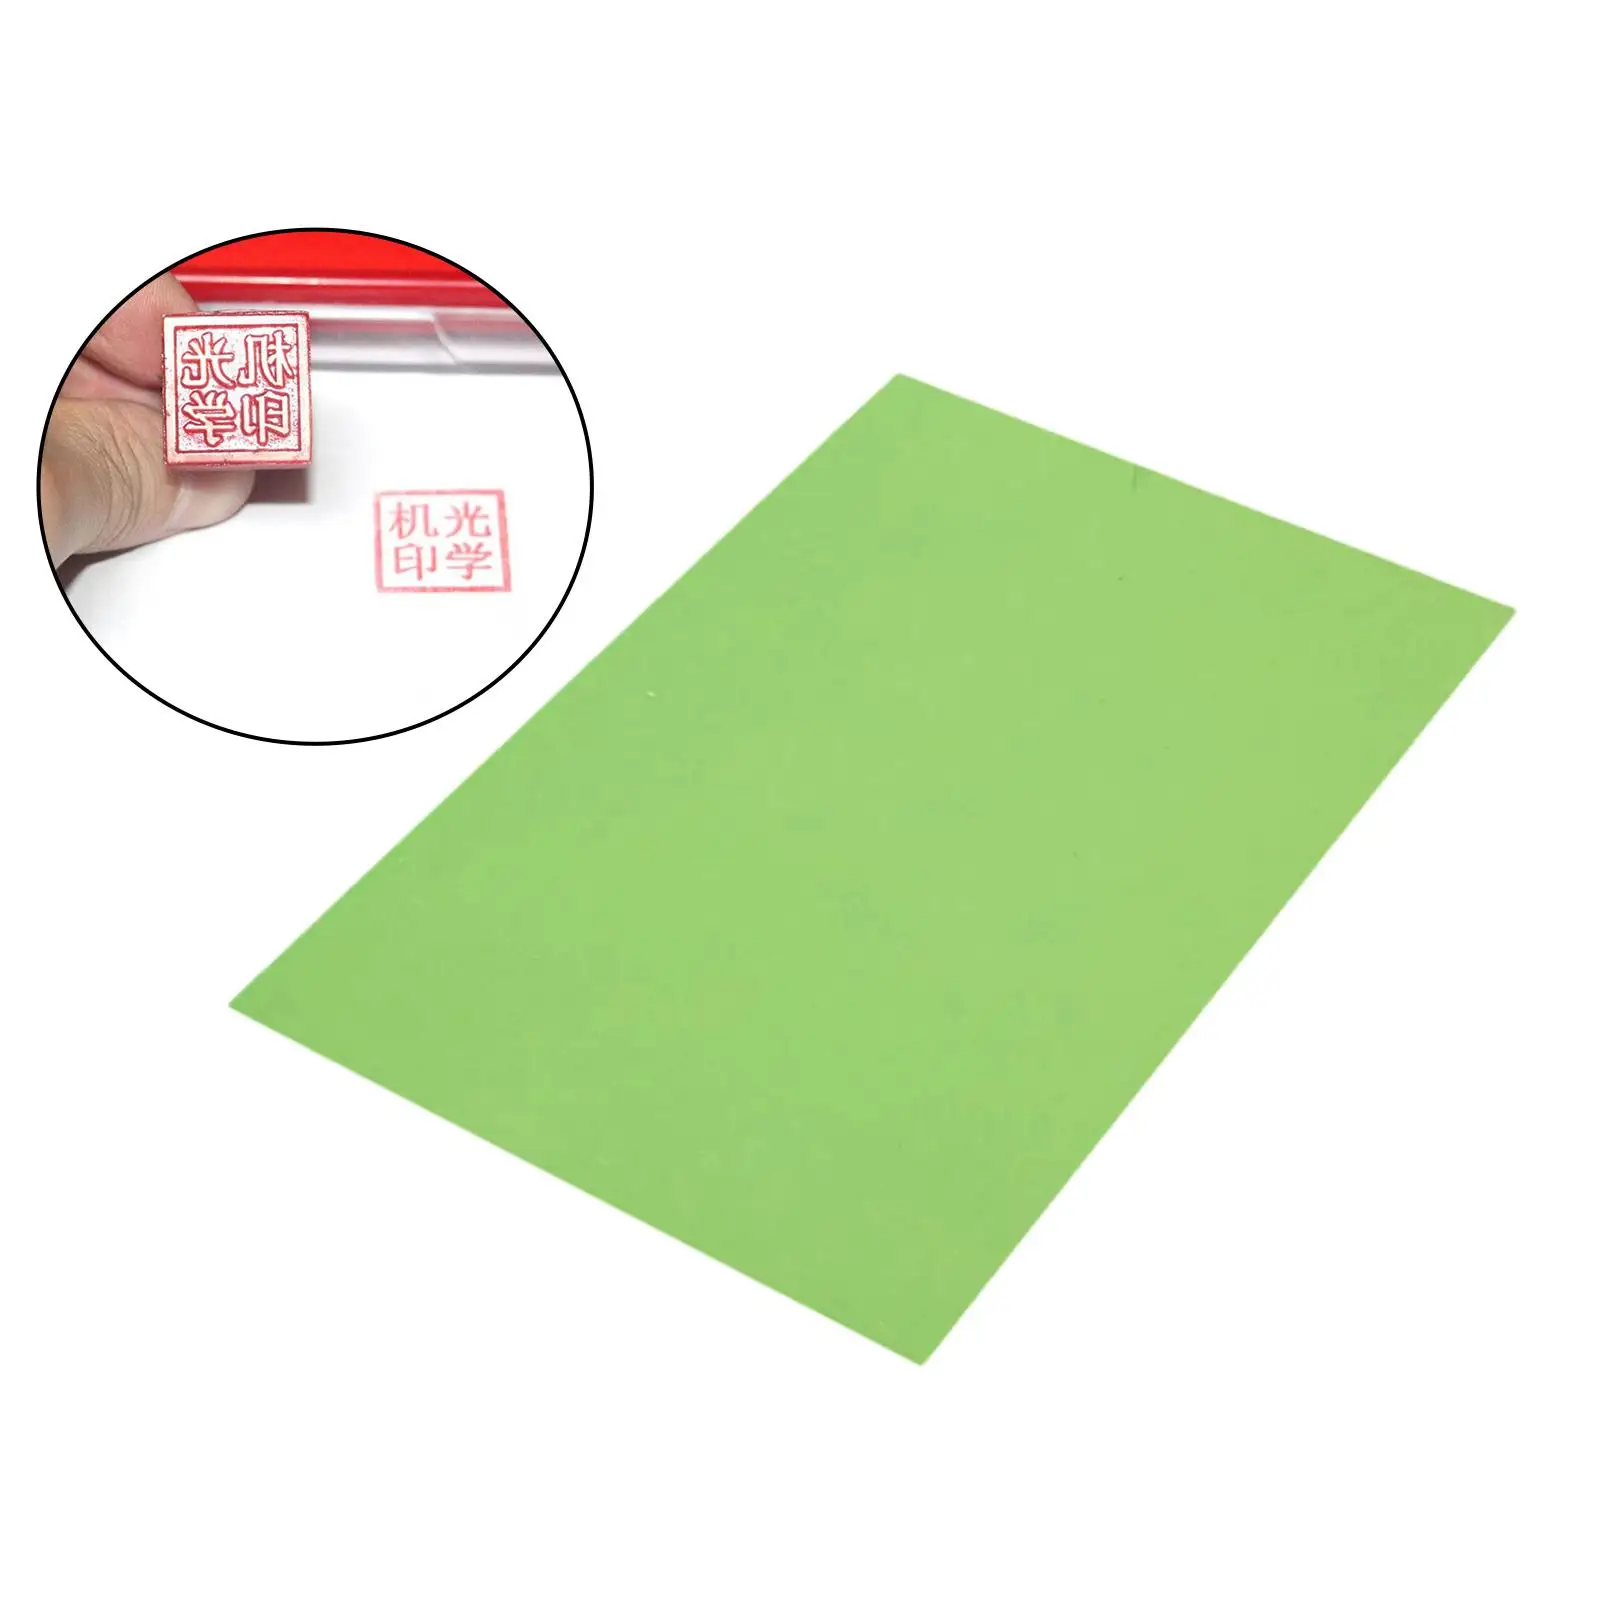 1 Sheet Solid Photopolymer Plate Stamp Making DIY Craft Printing Water Soluble